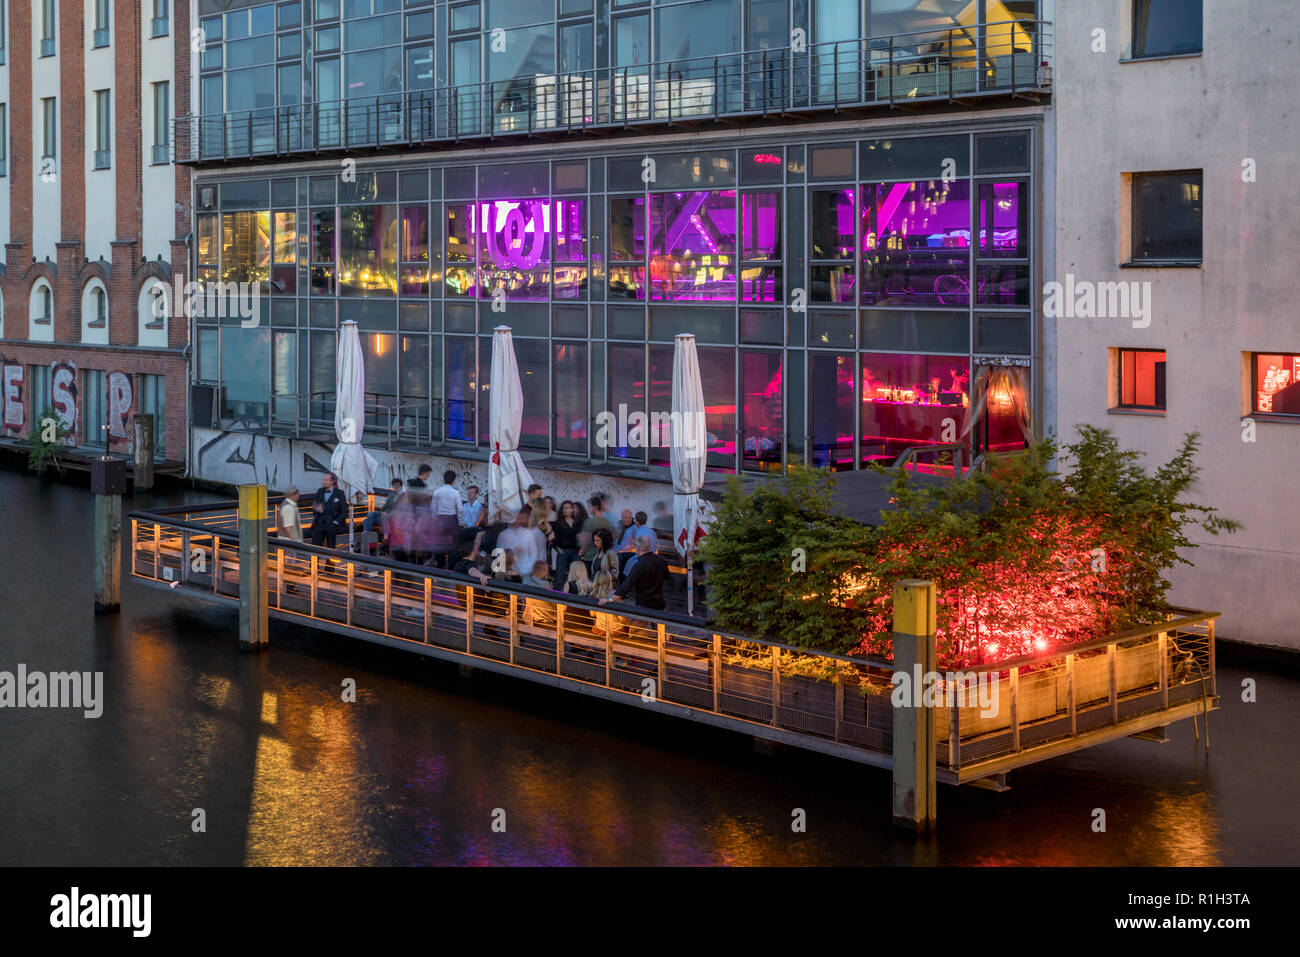 Watergate Club open air terasse on river Spree at twilight, Berlin, Germany Stock Photo